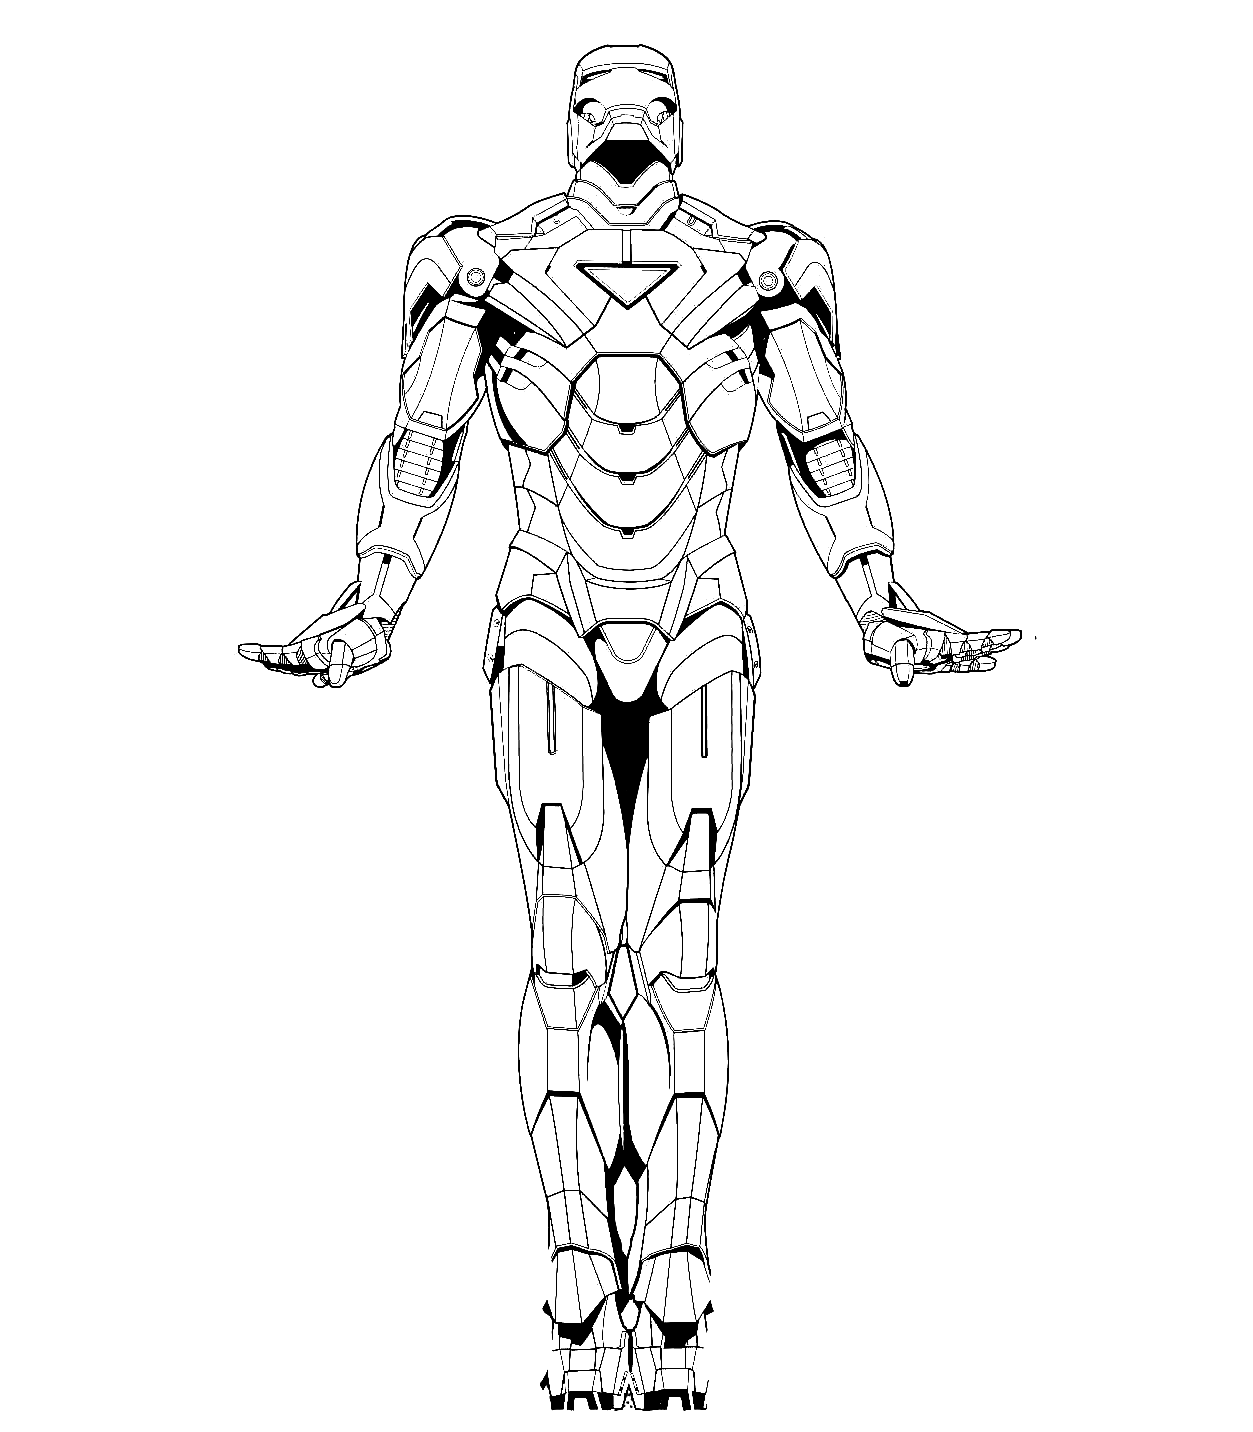 Cute Iron man dances in ballet Coloring Page